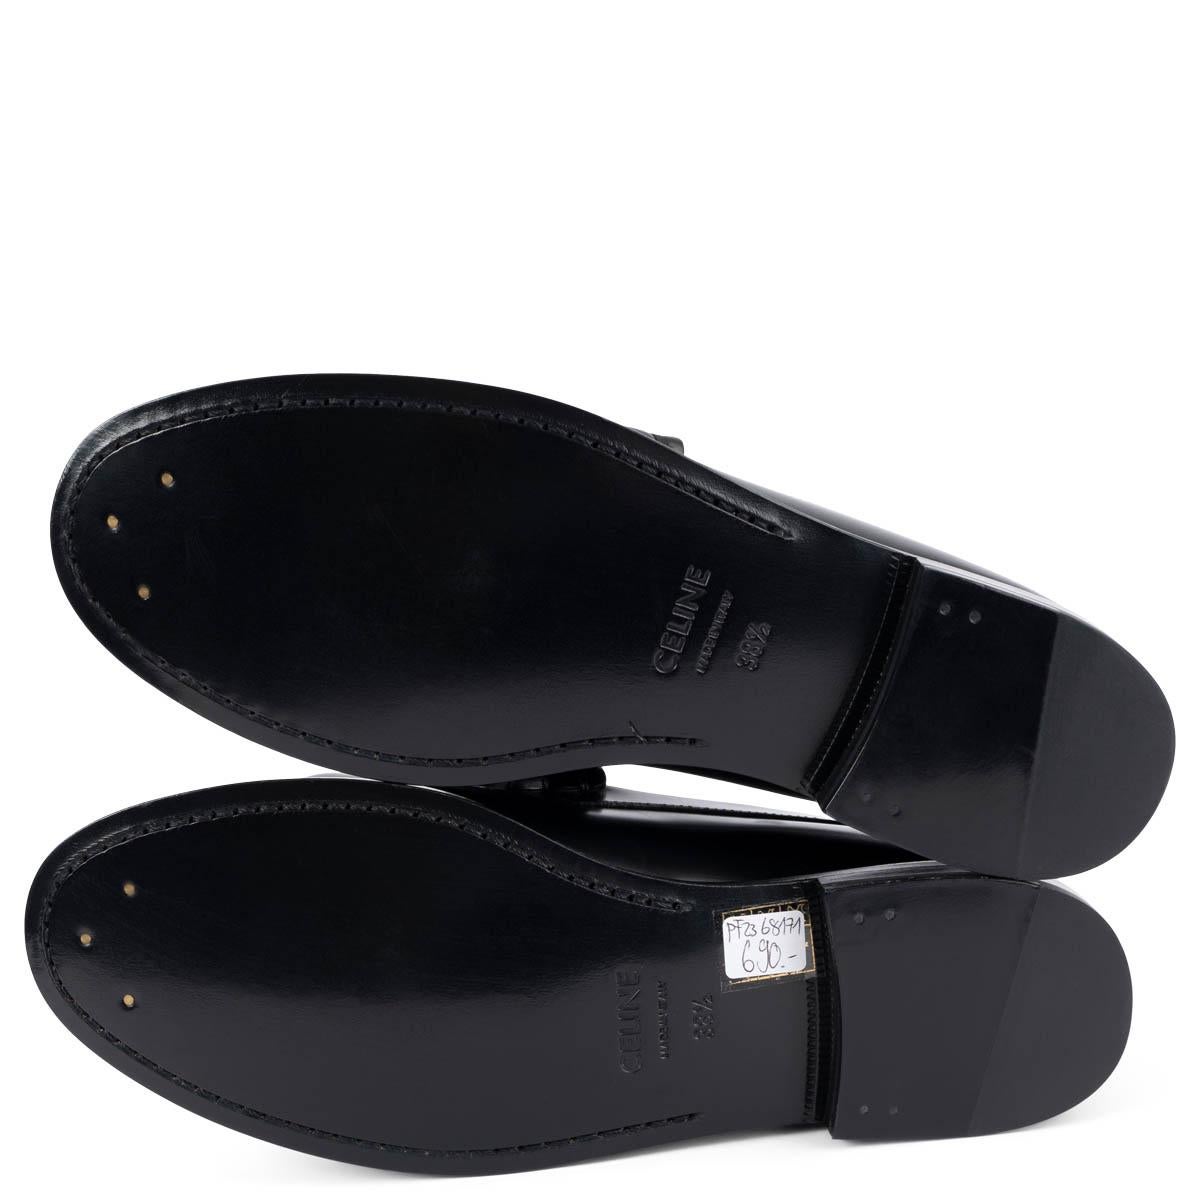 CELINE black leather LUCO TRIOMPHE Loafers Shoes 38.5 3